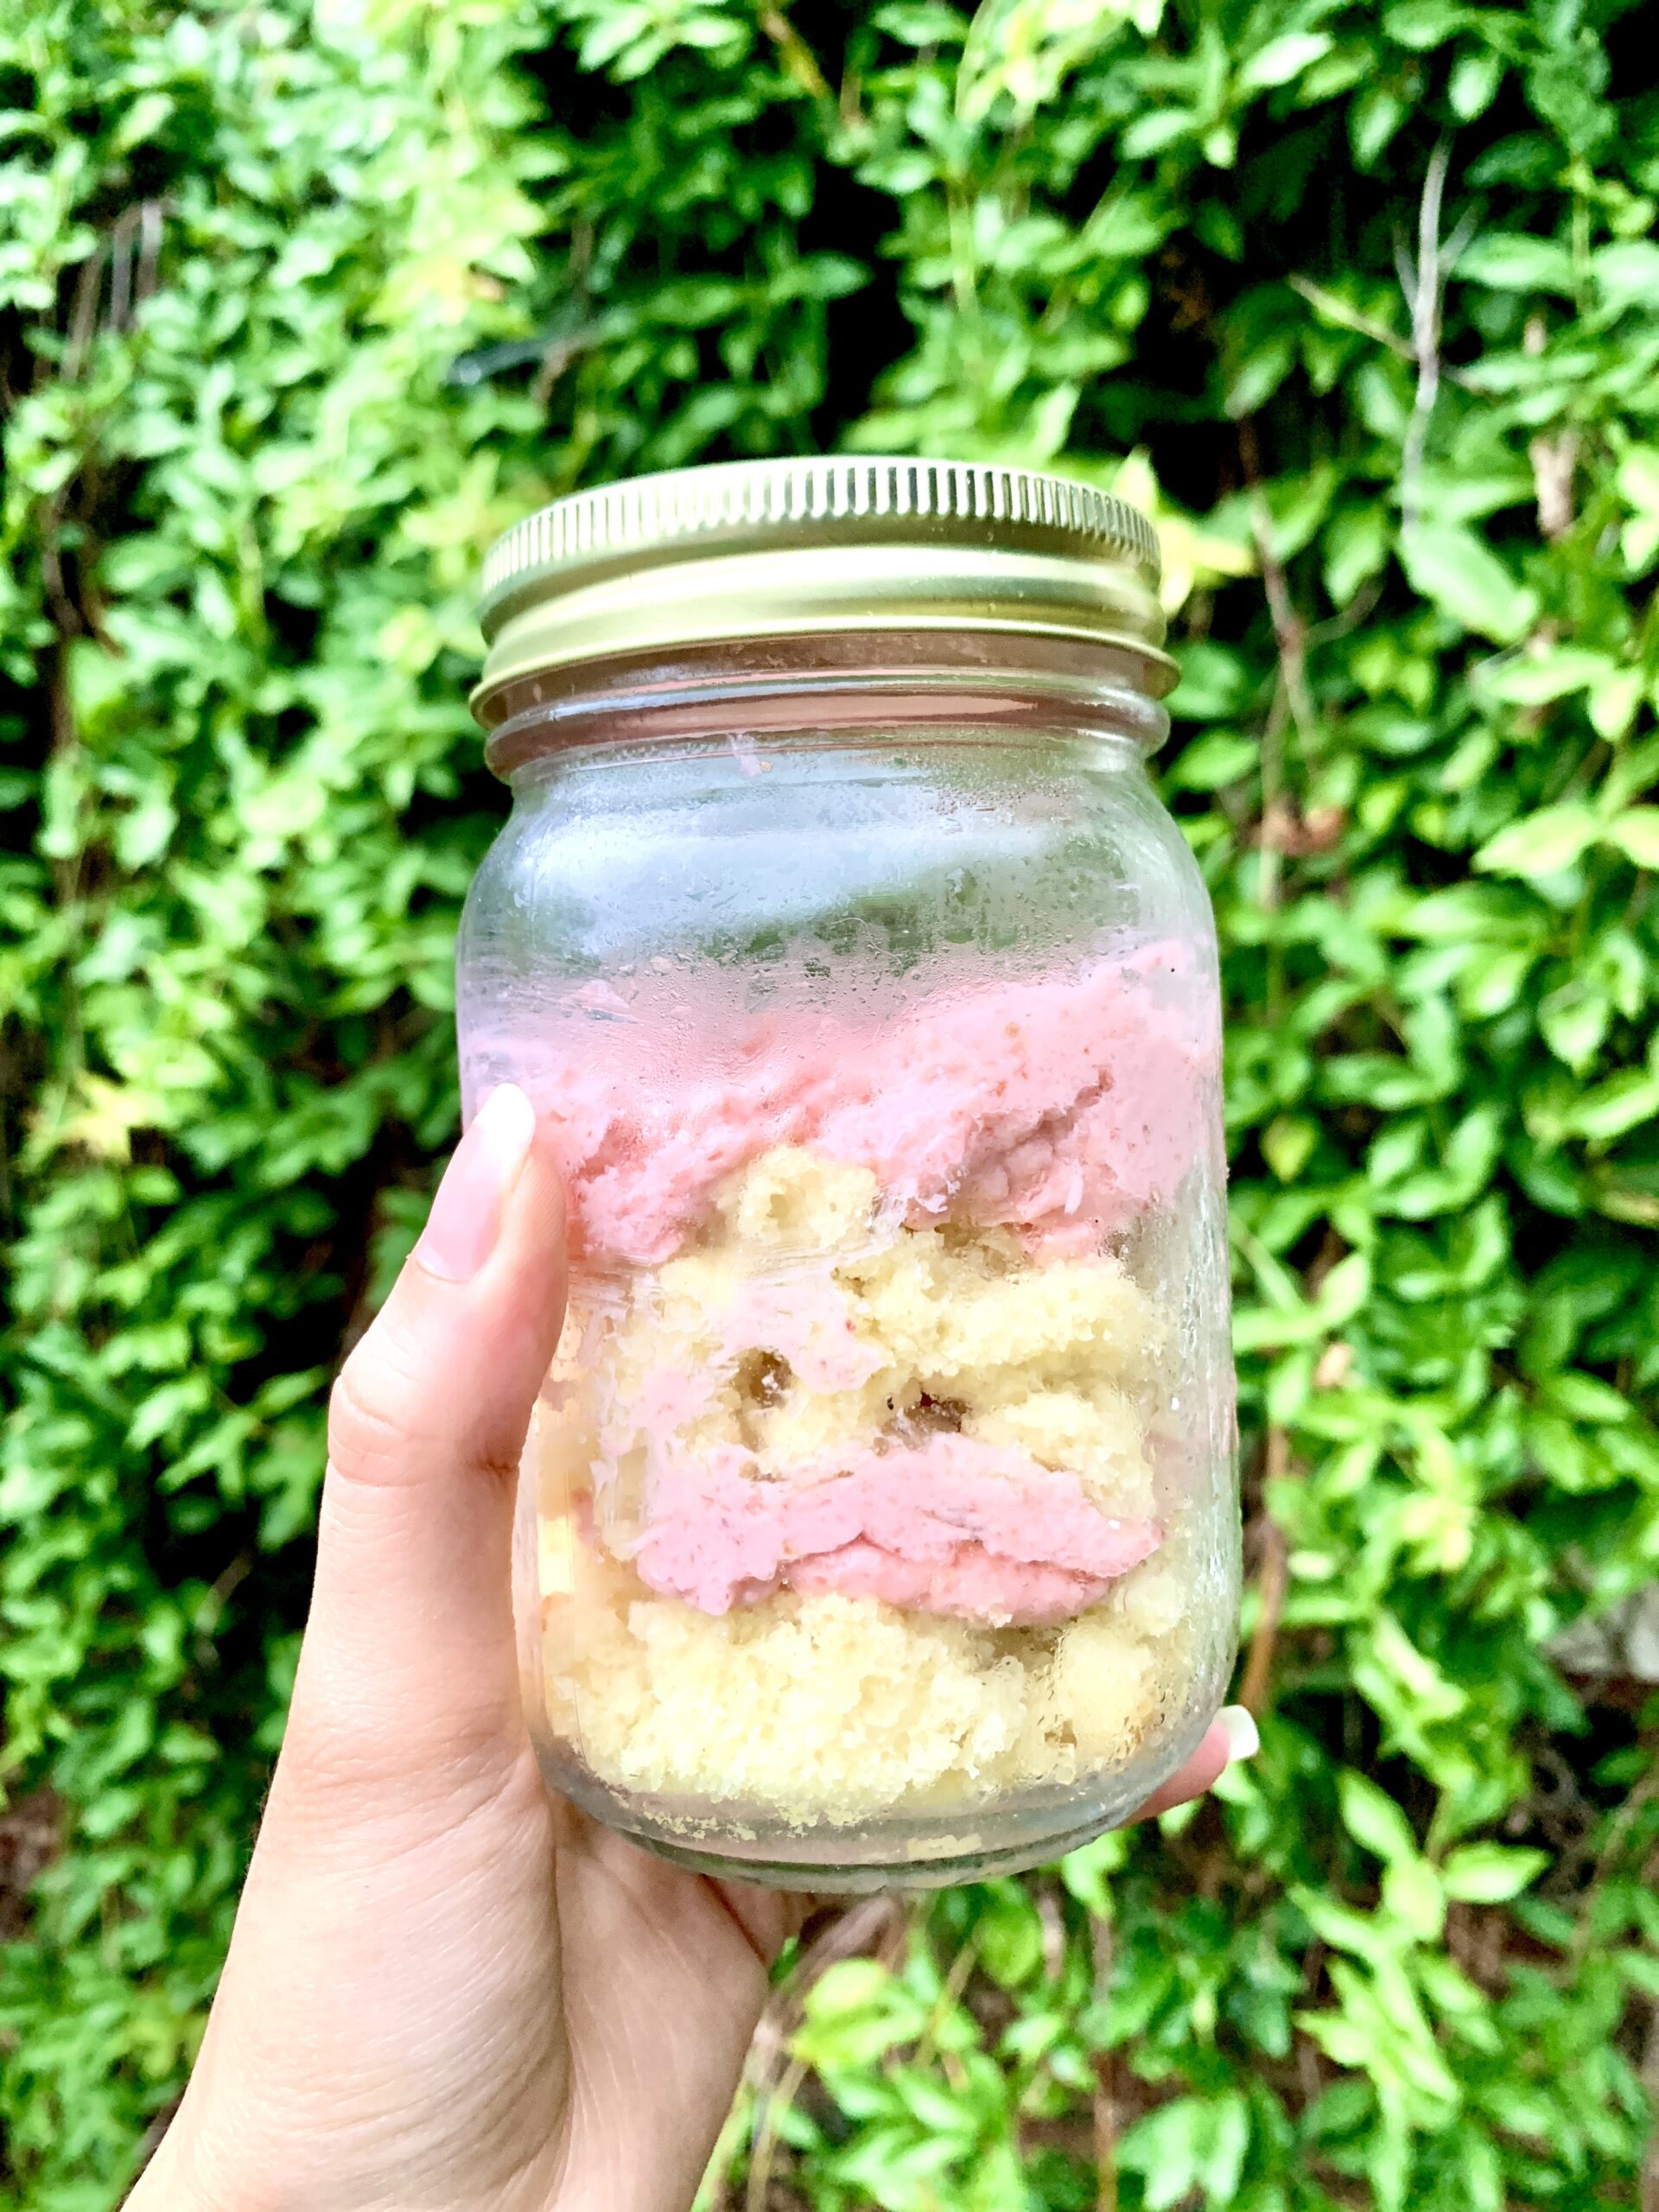 A person showcasing a delectable cake in a jar with pink frosting.